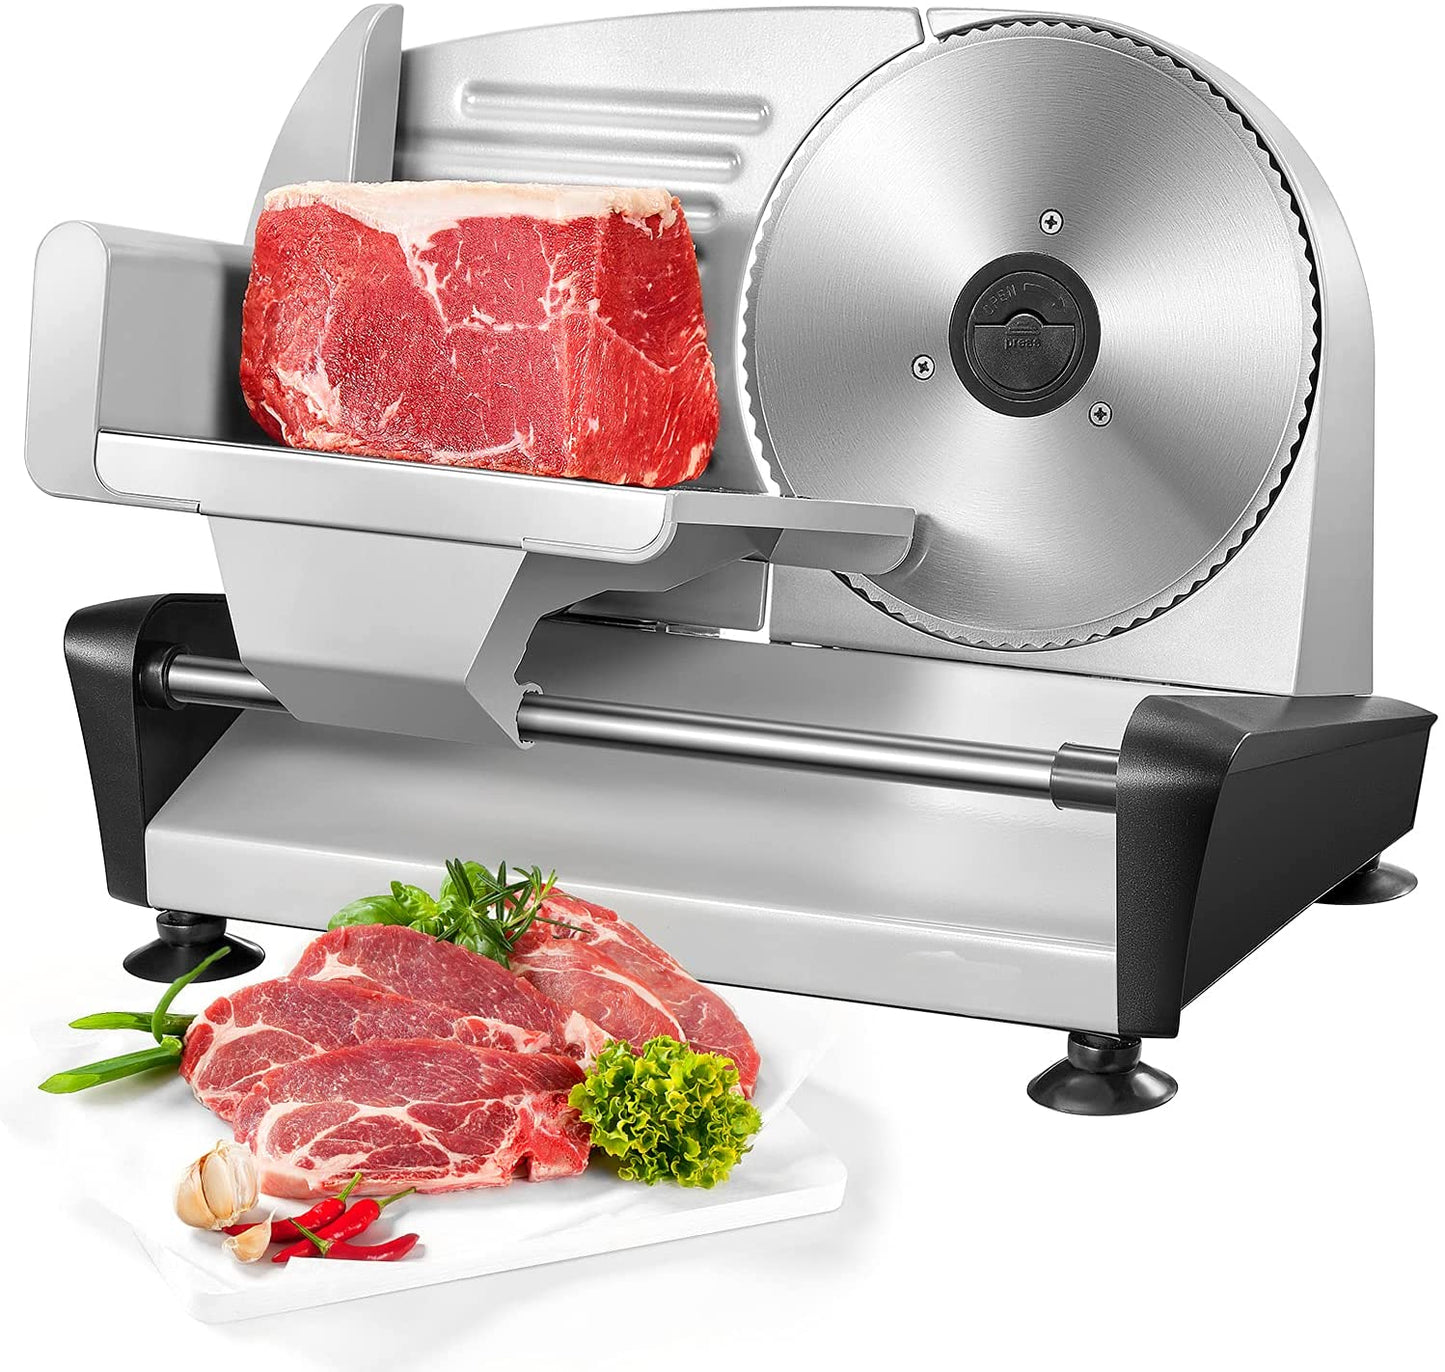 Meat Slicer For Home Use - Electric Deli & Food Slicer with Removable 7.5’’ Stainless Steel Blade and 0-15mm Adjustable Thickness for Meat, Cheese, Bread, Include Food Pusher & Non-Slip Feet